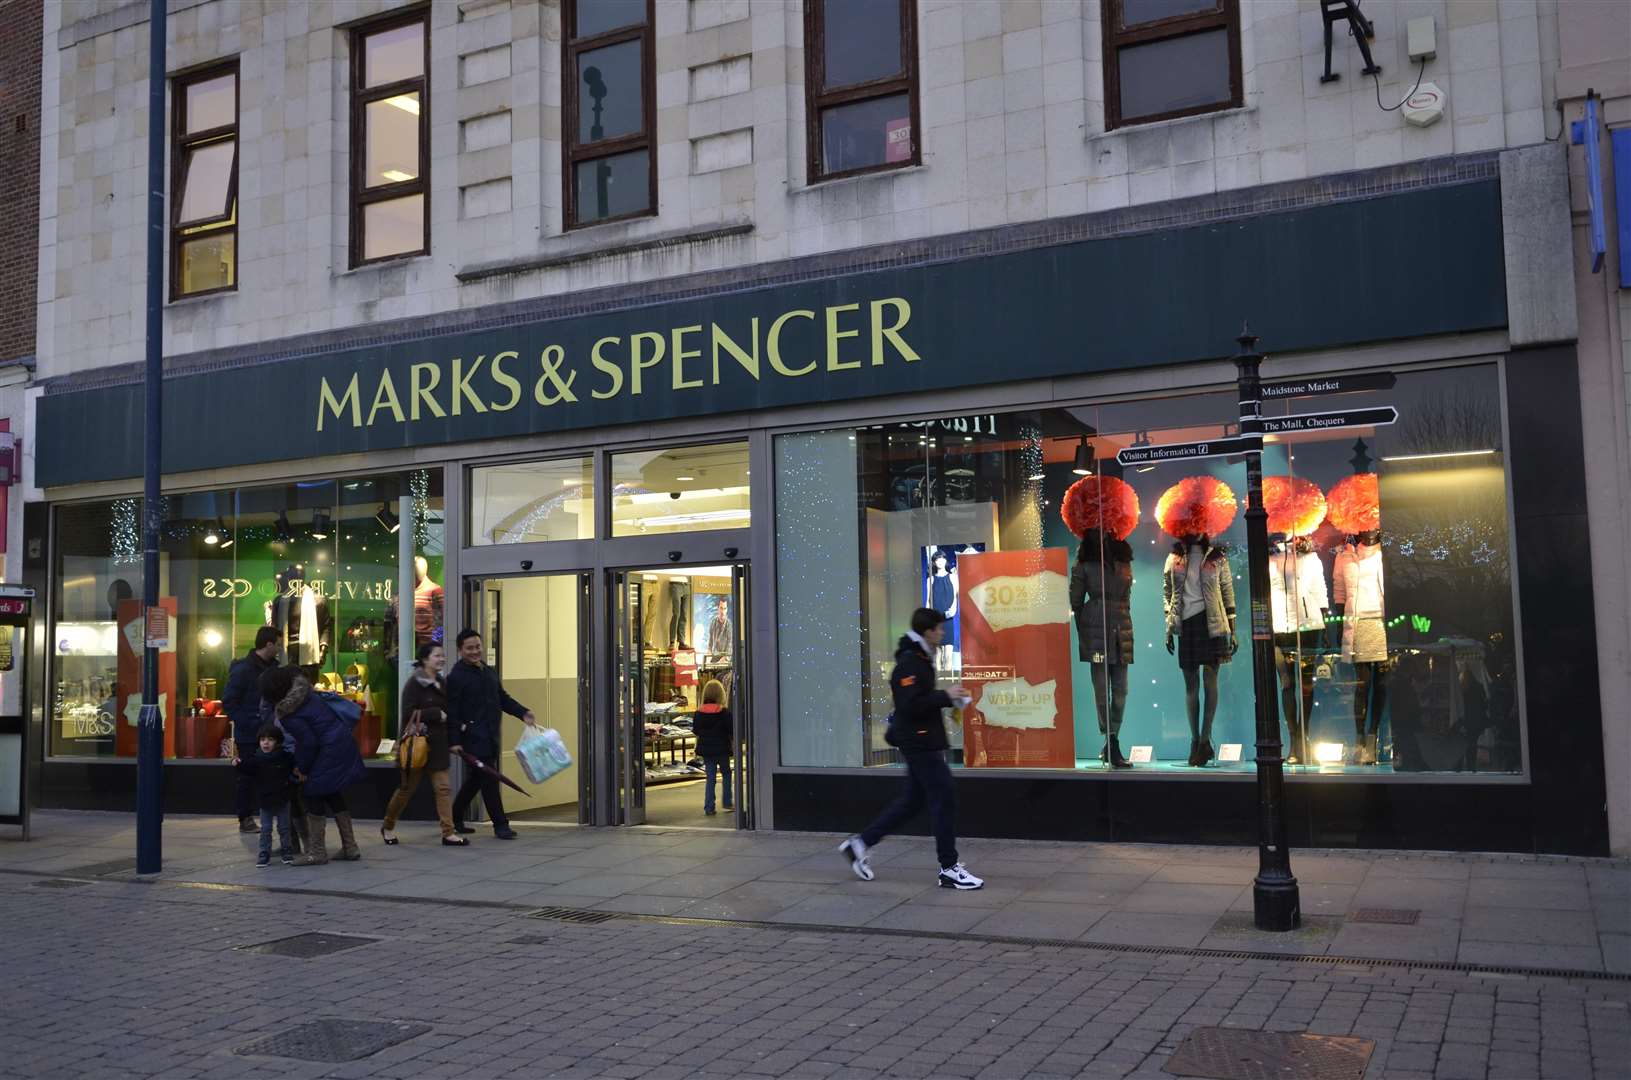 Marks & Spencer in Maidstone. Picture: Bob Kitchin